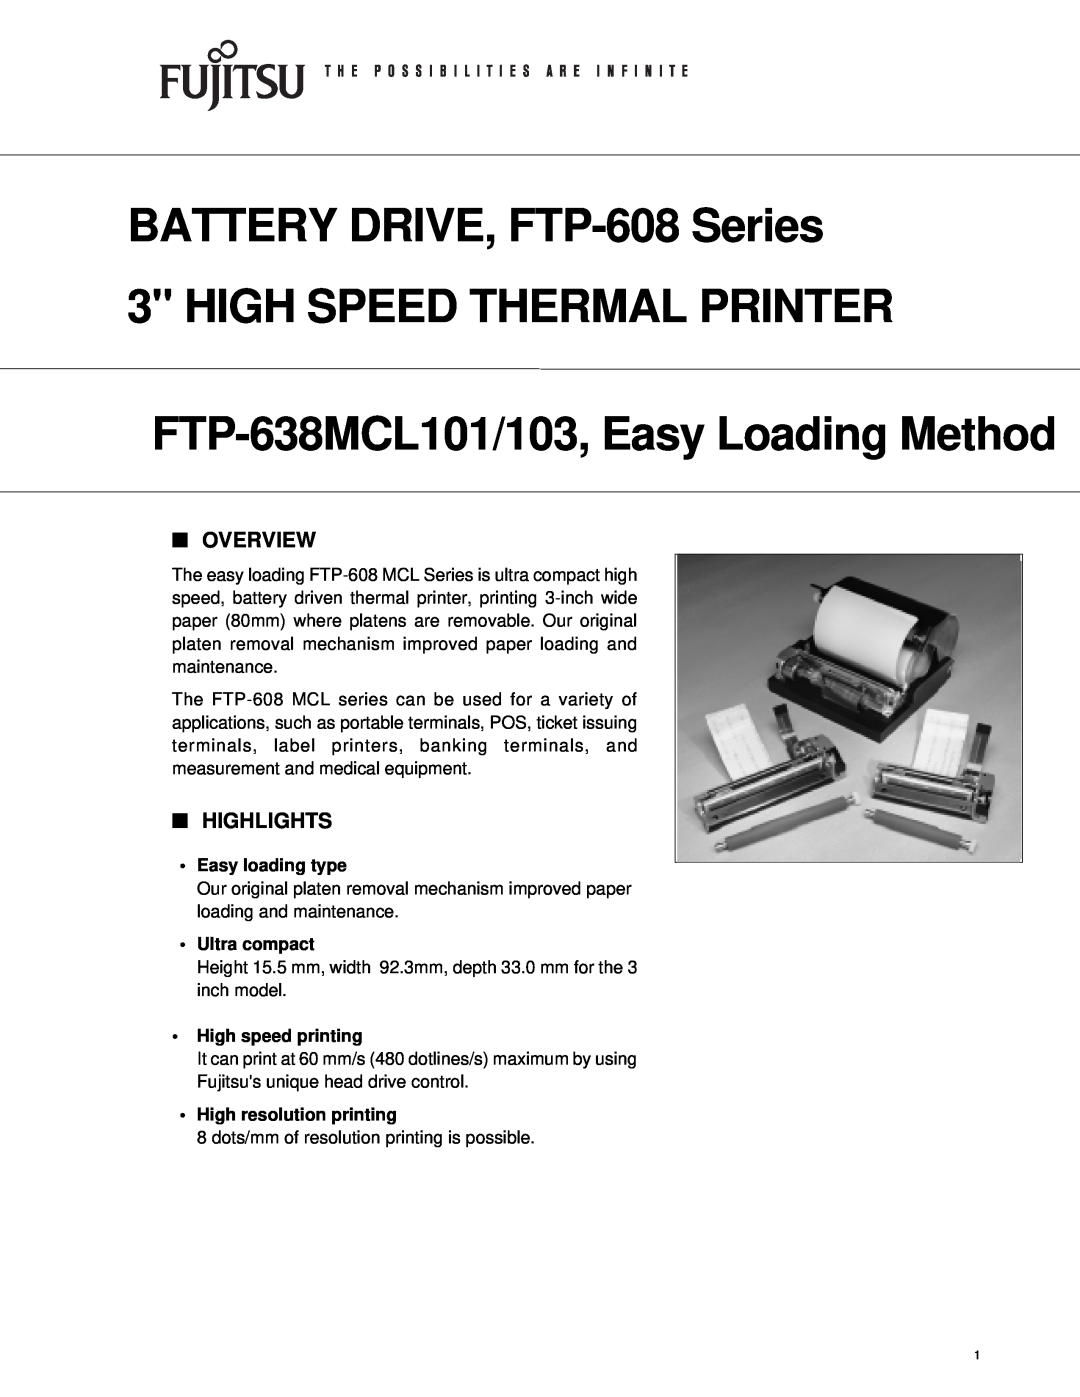 Fujitsu FTP-638MCL103 manual Overview, Highlights, BATTERY DRIVE, FTP-608 Series 3 HIGH SPEED THERMAL PRINTER 